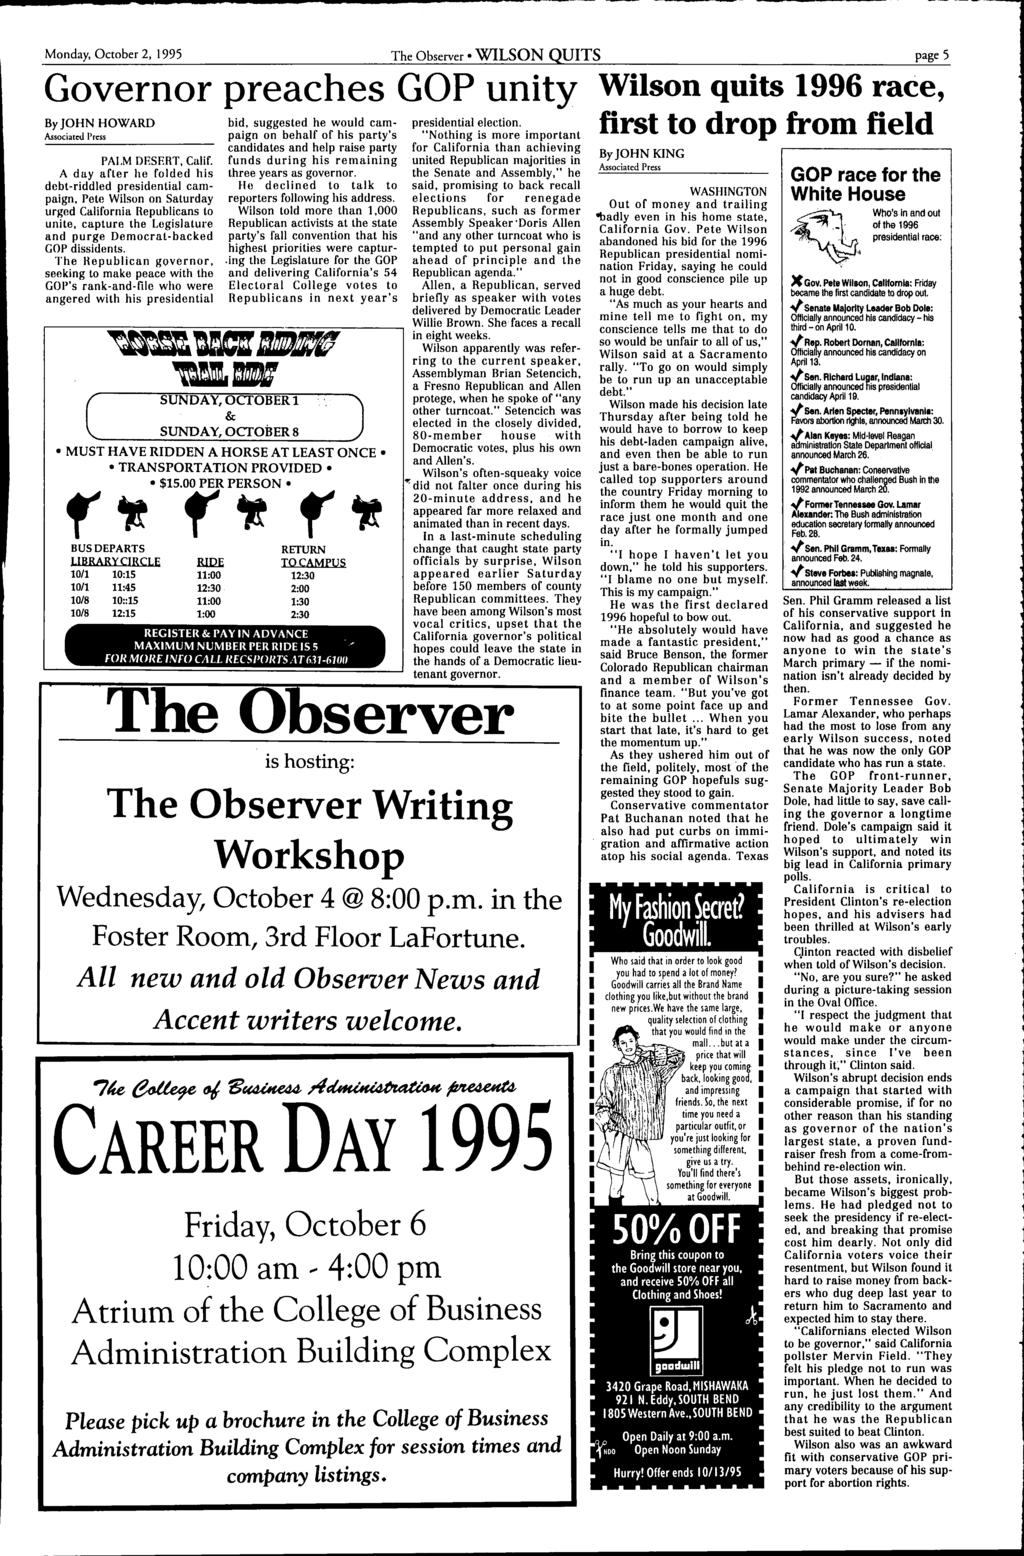 Monday, Octobe 2, 1995 The Obseve WILSON QUITS page 5 Goveno peaches GOP unity By JOHN HOWARD Associated Pess PALM DESERT, Calif.